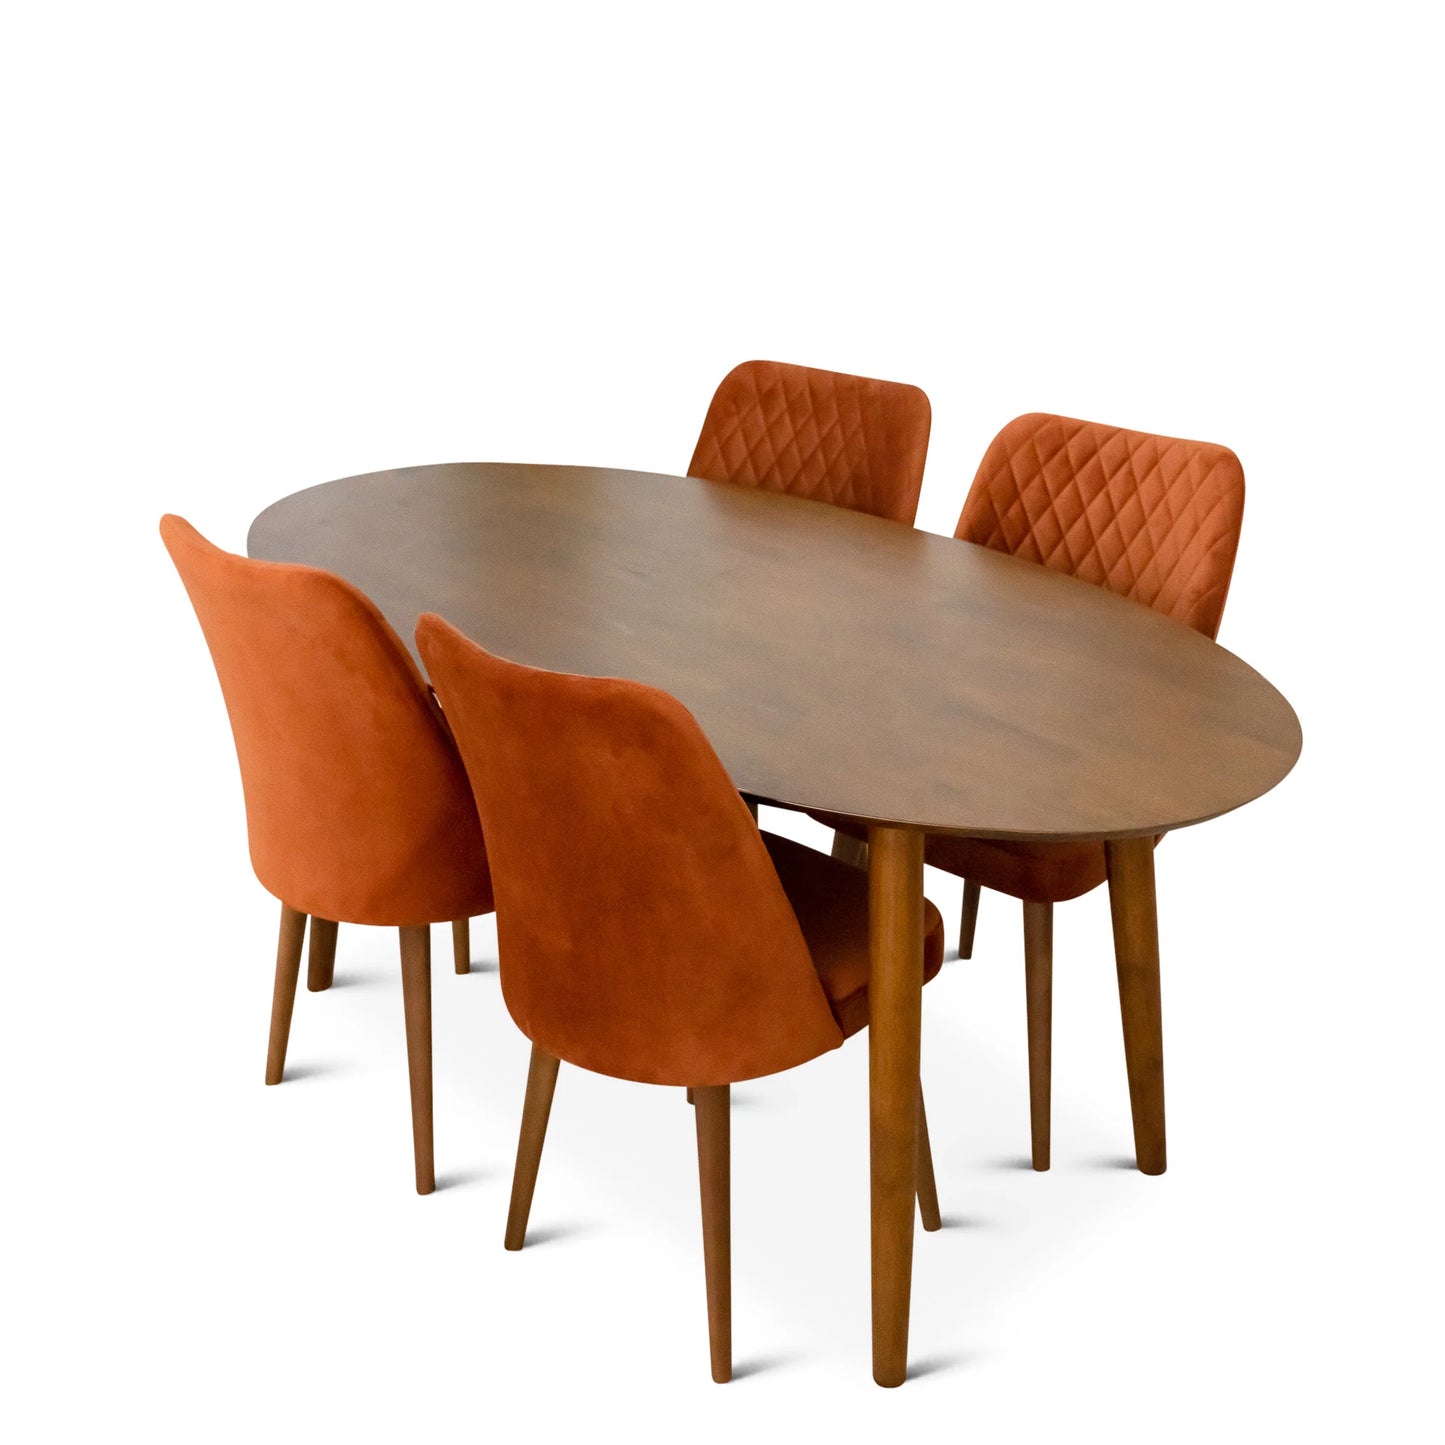 Rixos Dining set with 4 Evette Orange Dining Chairs (Walnut)